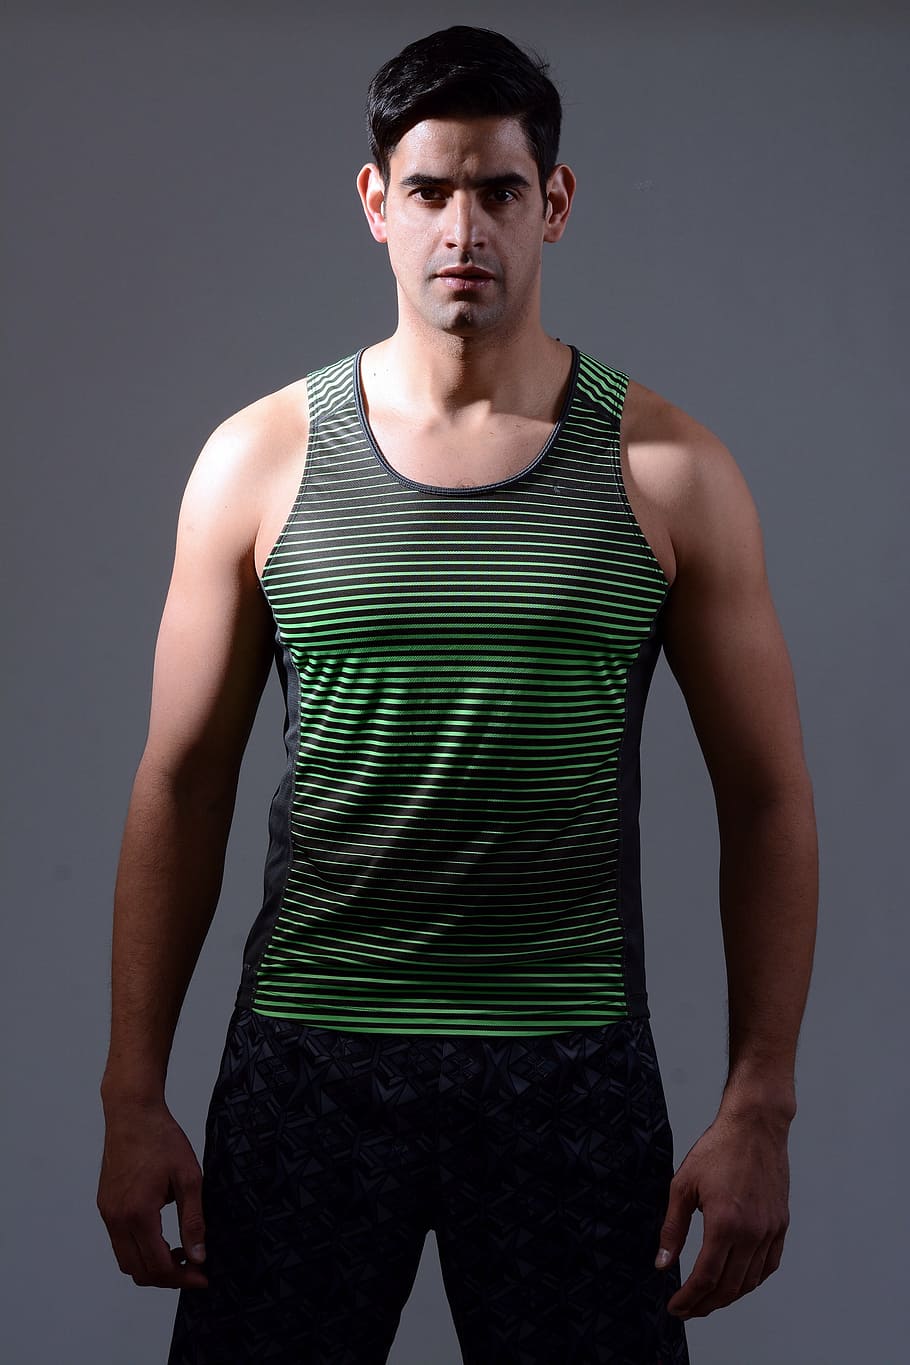 man wearing black and green striped tank top and gray bottoms standing, HD wallpaper